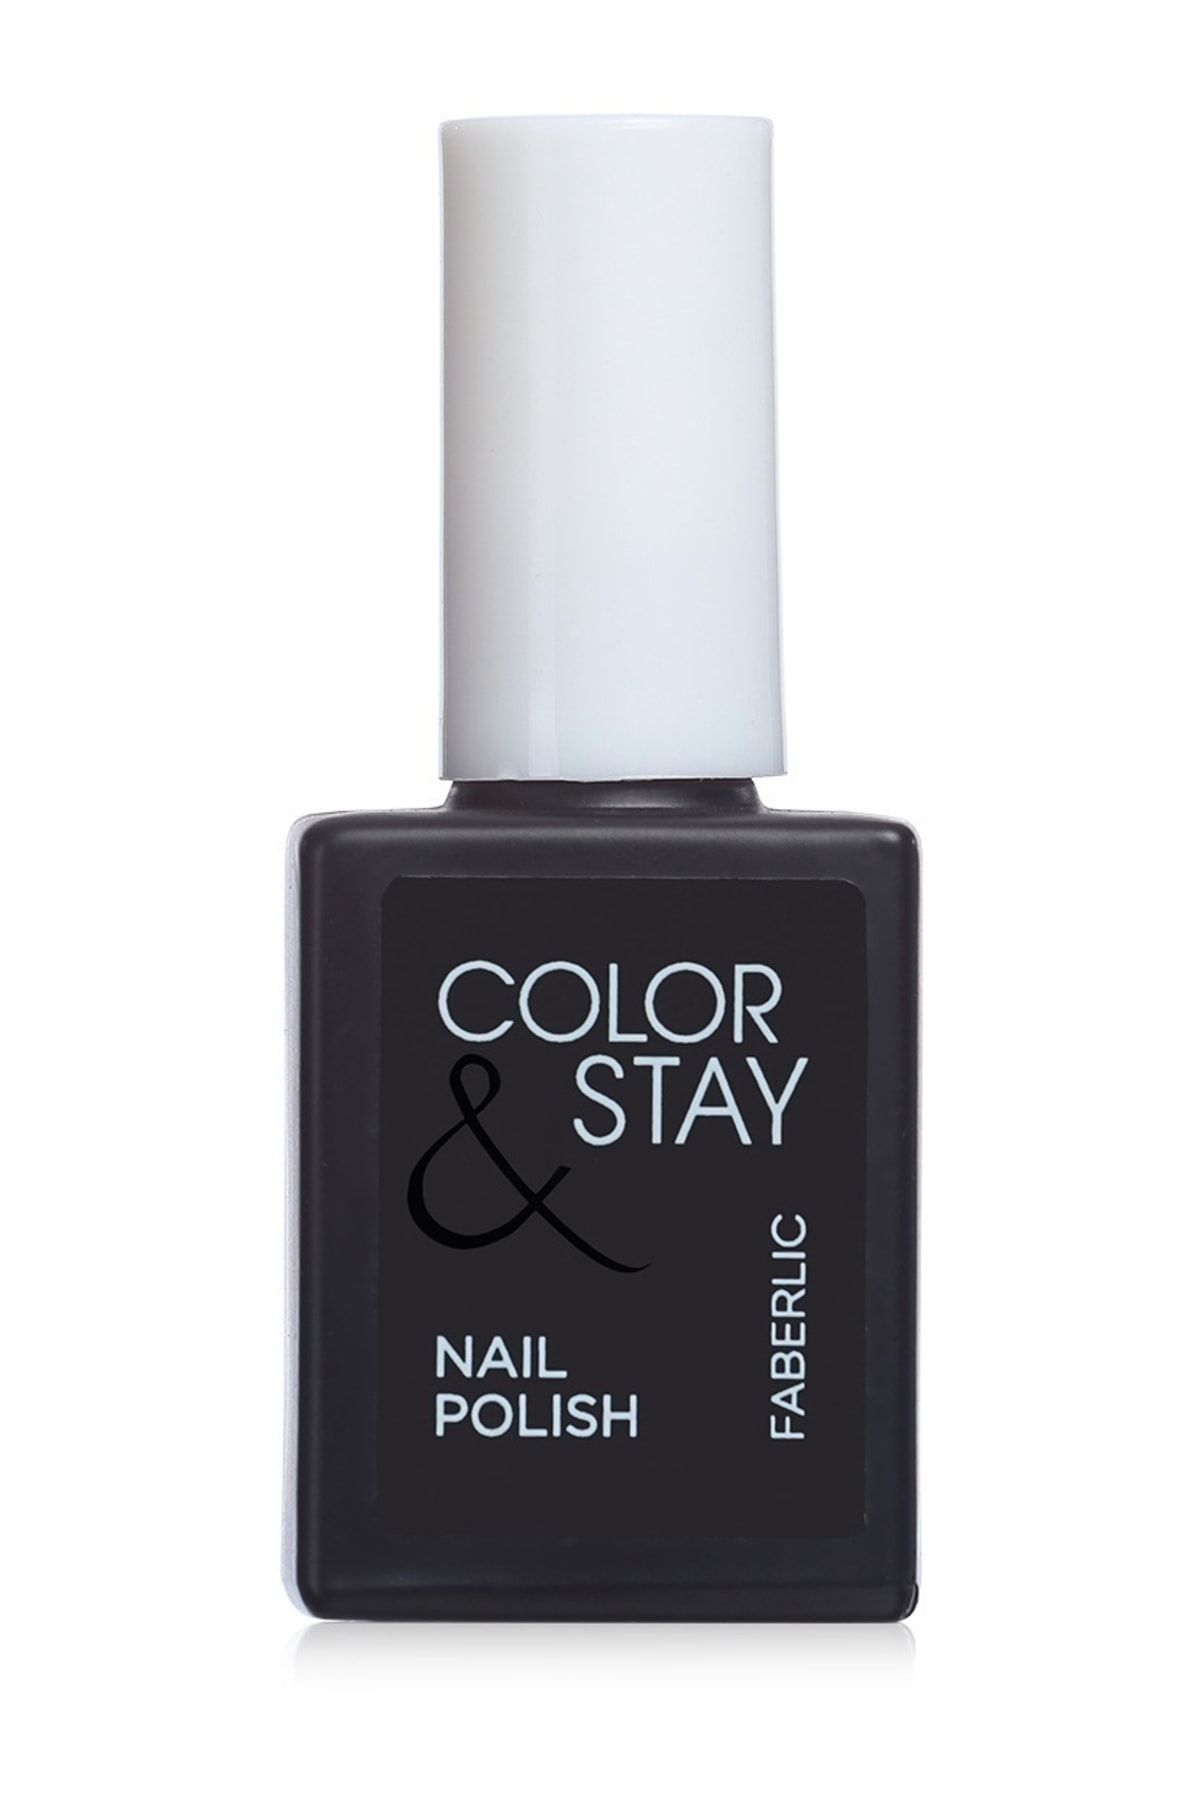 Faberlic Color & Stay: Exotic Voyage Oje, Ton "mercan Resifi"